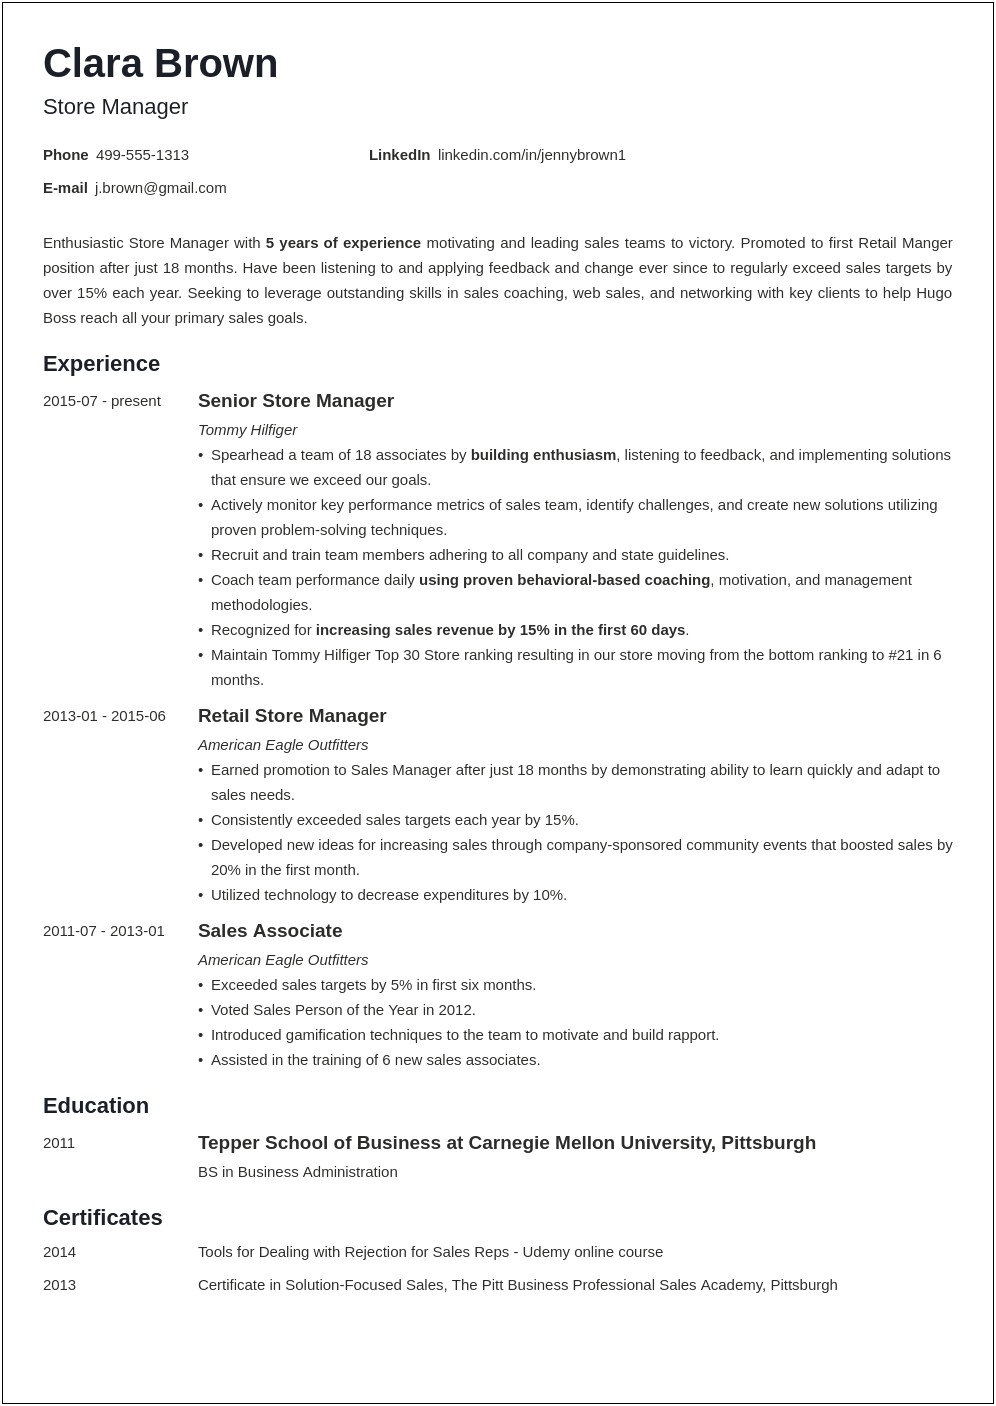 Resume Objective Statement For Grocery Store